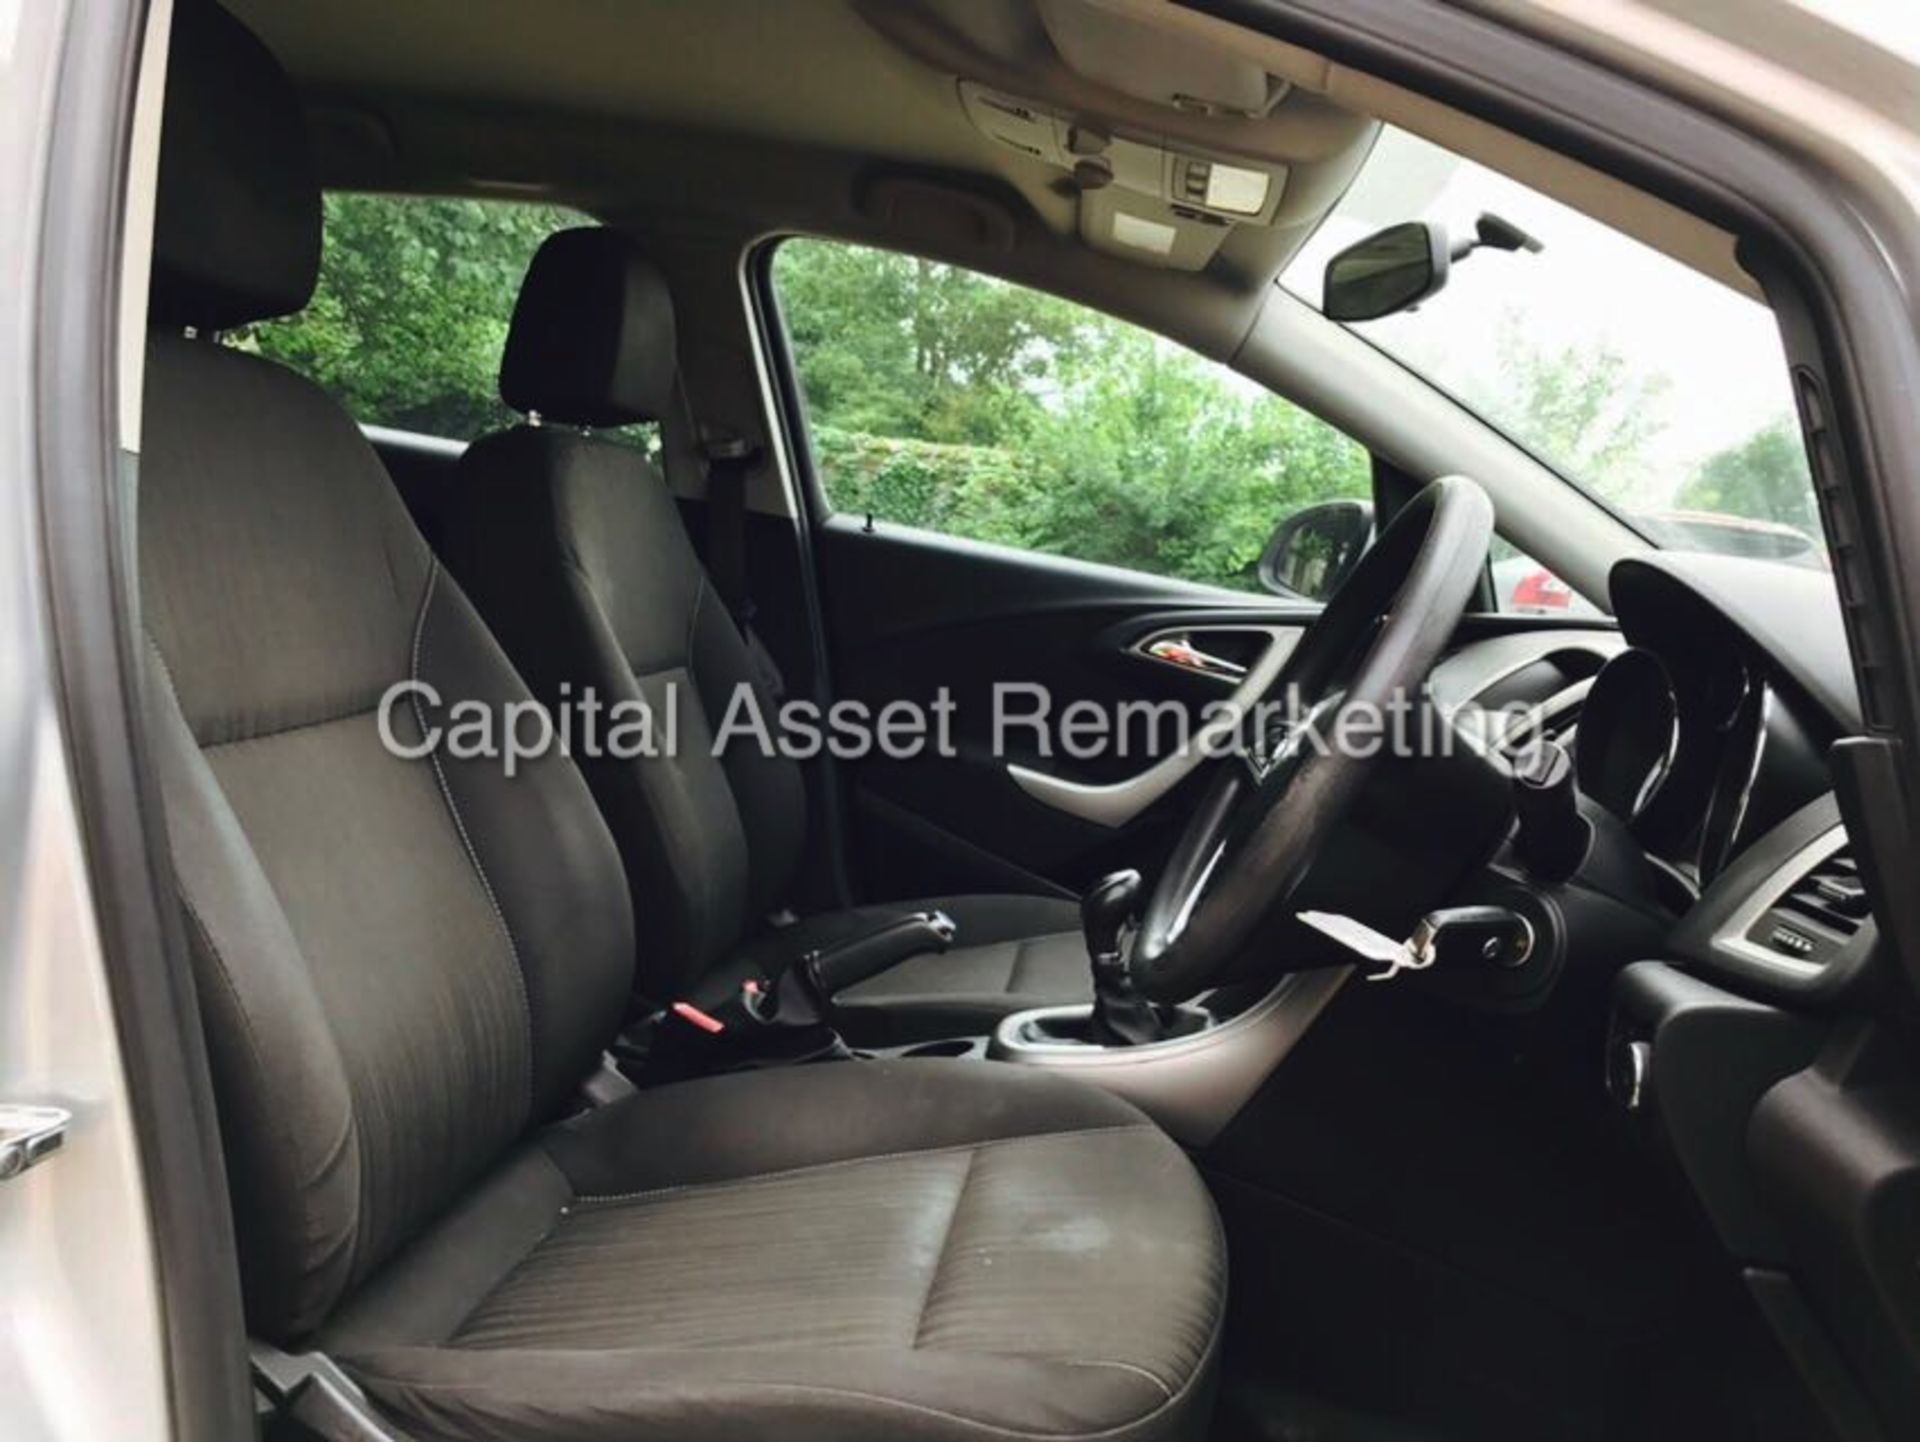 (ON SALE) VAUXHALL ASTRA 'EXCLUSIVE' (2012 MODEL) '1.7 CDTI - ECOFLEX - 6 SPEED' *AIR CON* (1 OWNER) - Image 9 of 19